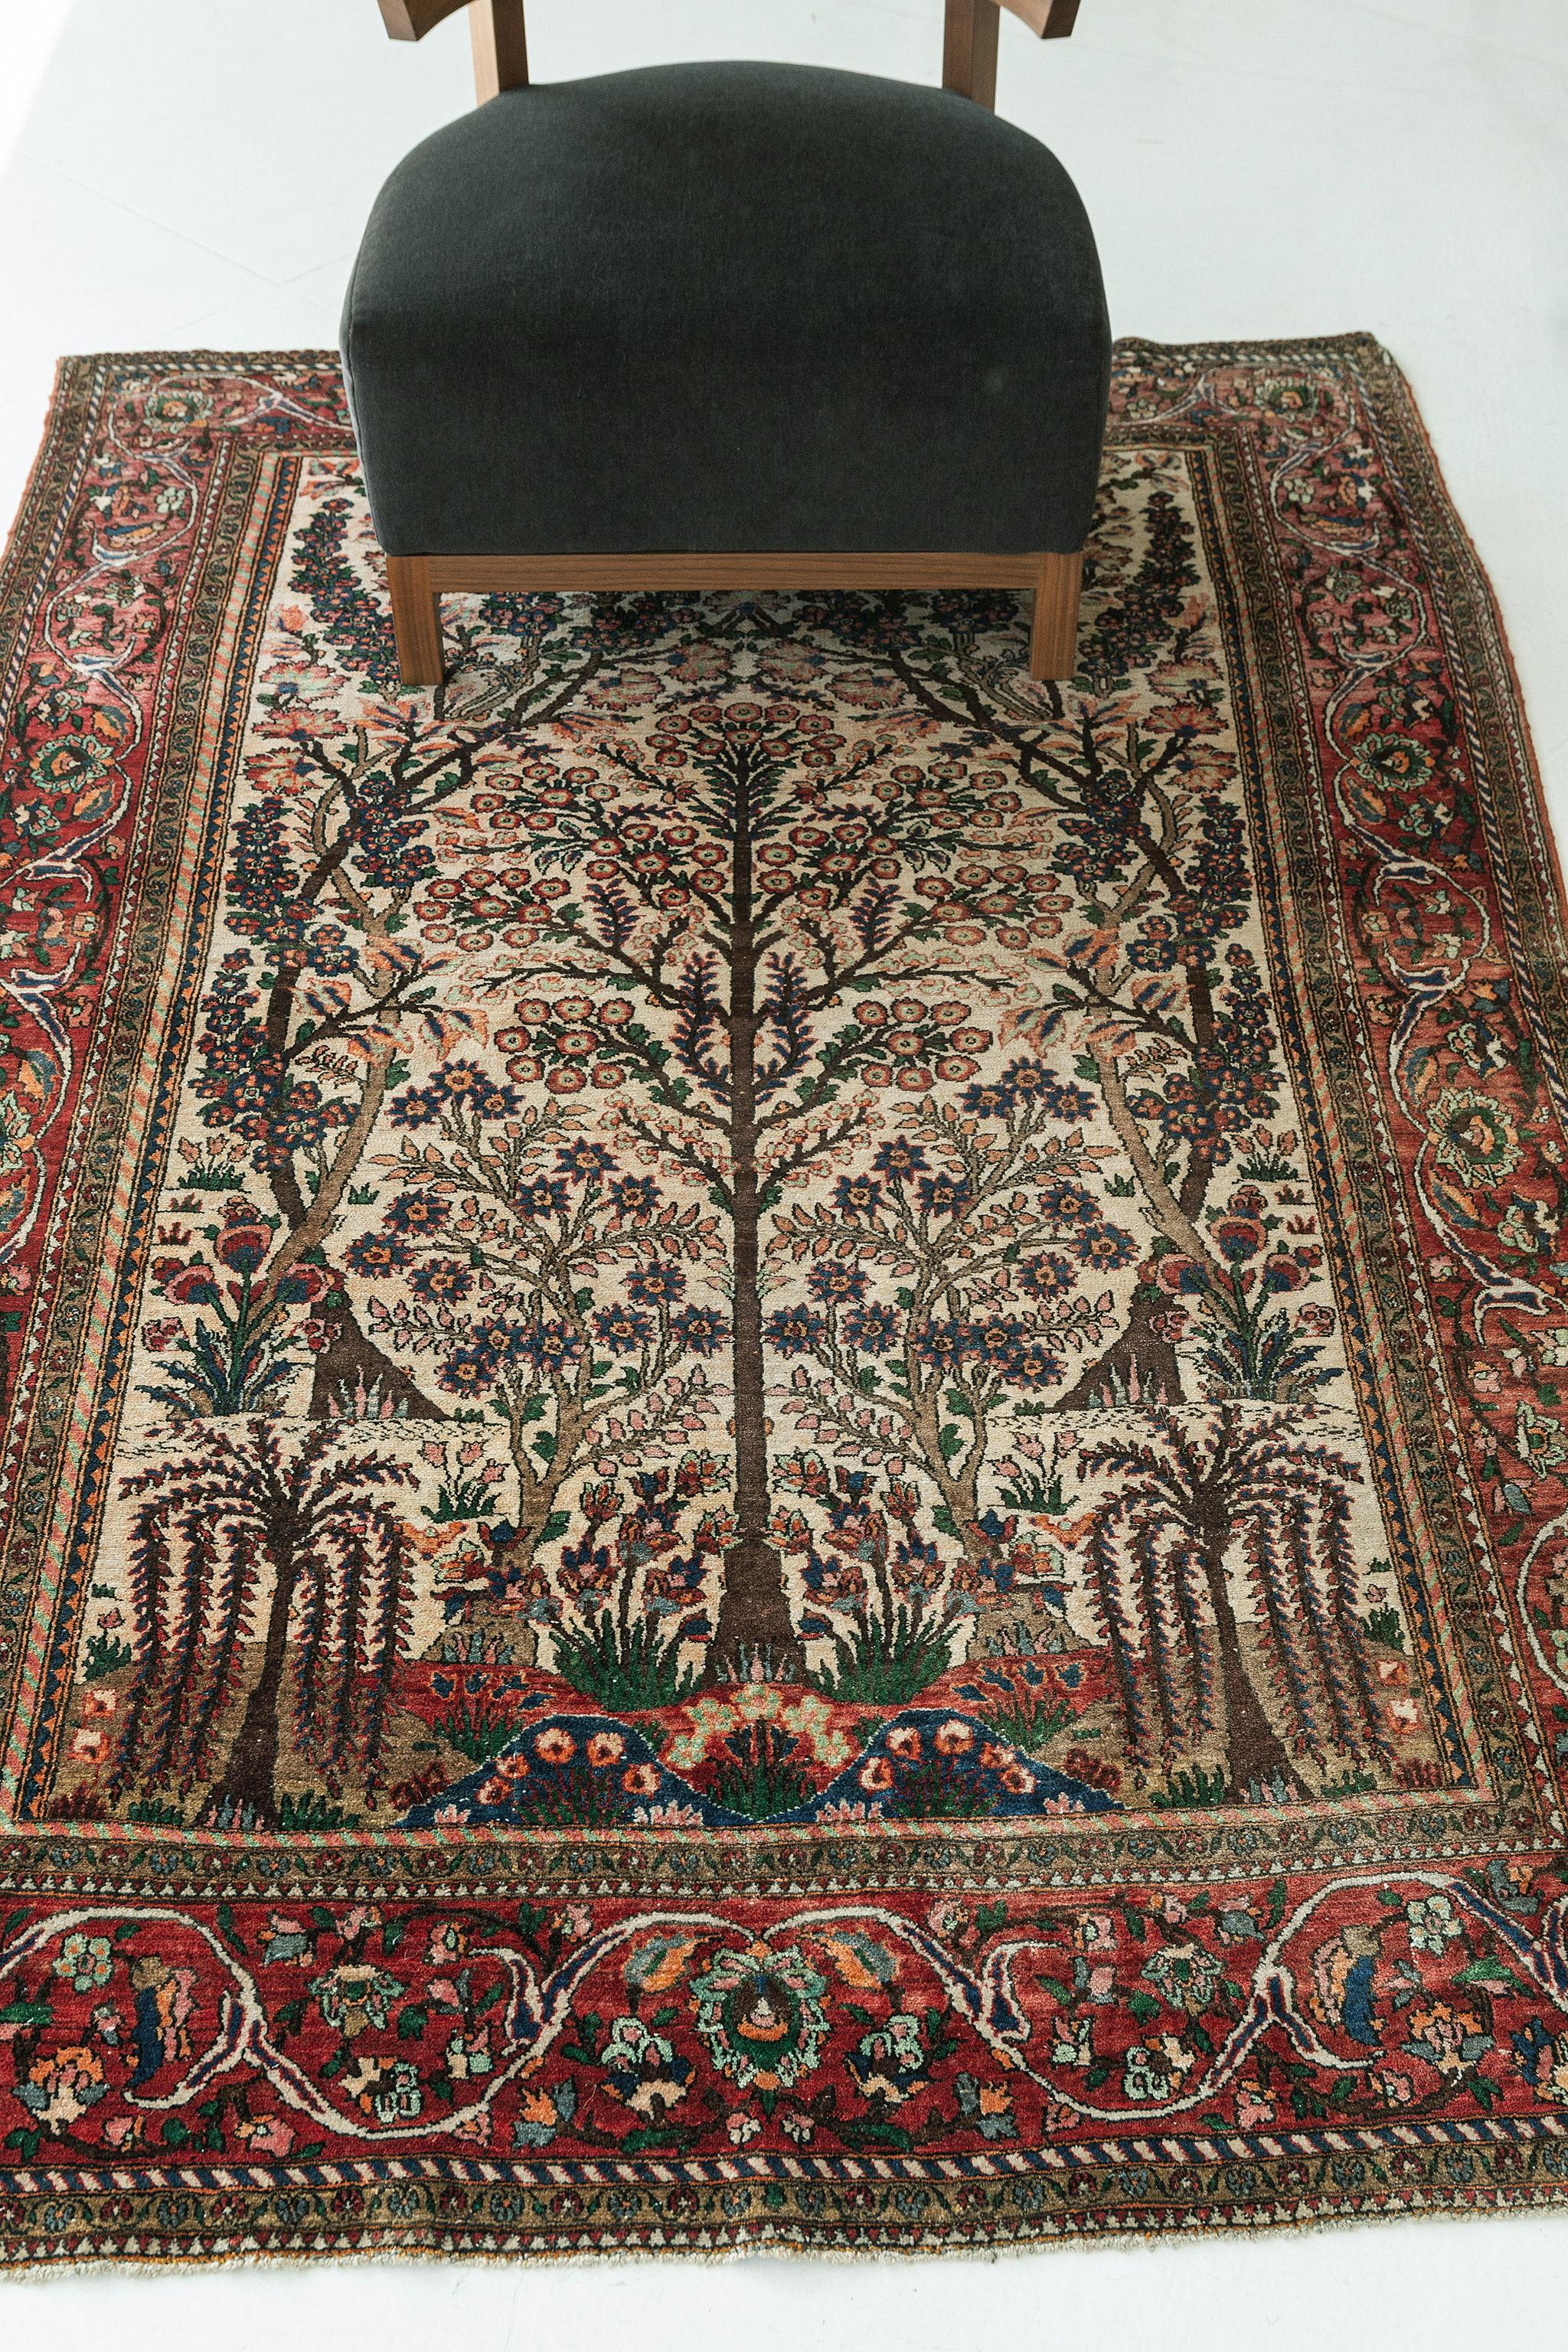 This finely crafted Vintage Persian Isfahan rug features an all-over botanical pattern of hyacinths, stylized florals and blooming palmettes. The field is patterned with dramatic curvilinear leaves, with lavish flowers interspersed throughout the